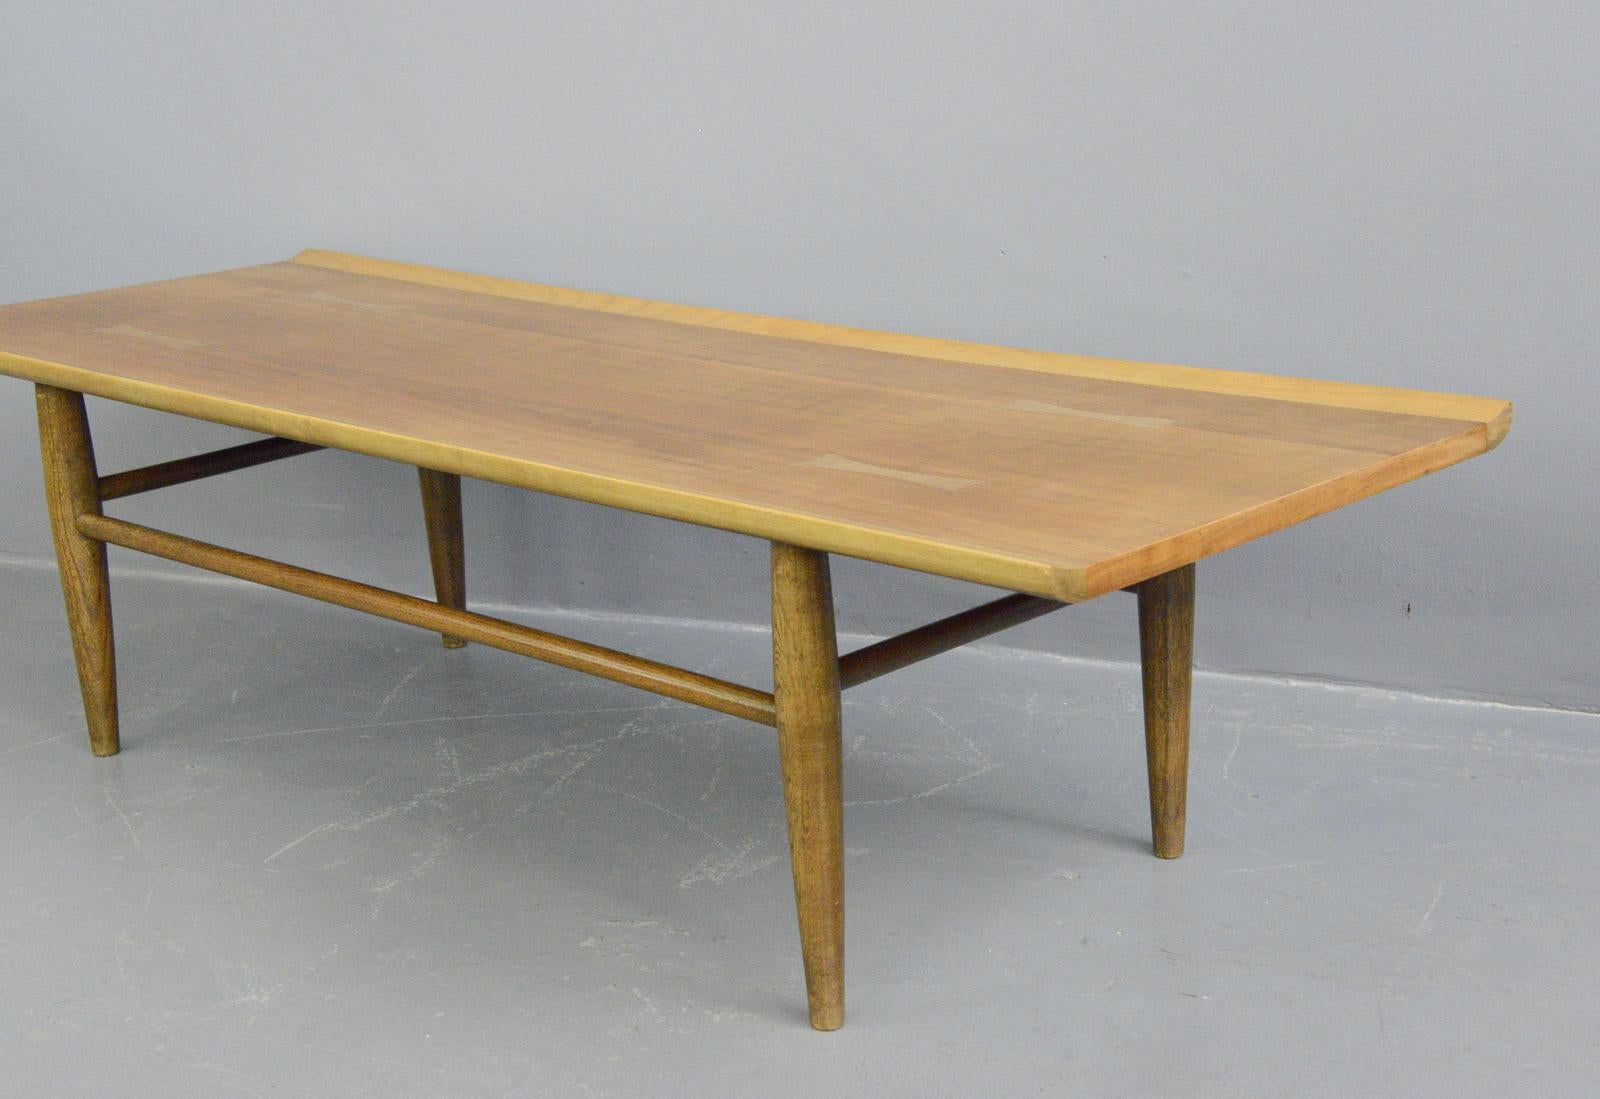 Midcentury coffee table by Baumritter, circa 1950s

- Solid walnut
- Decorative bow tie joints
- Waterproof top
- Made by Baumritter
- American ~ 1950s
- 39cm deep x 39cm tall x 142cm long

Condition Report

Some very light marks in